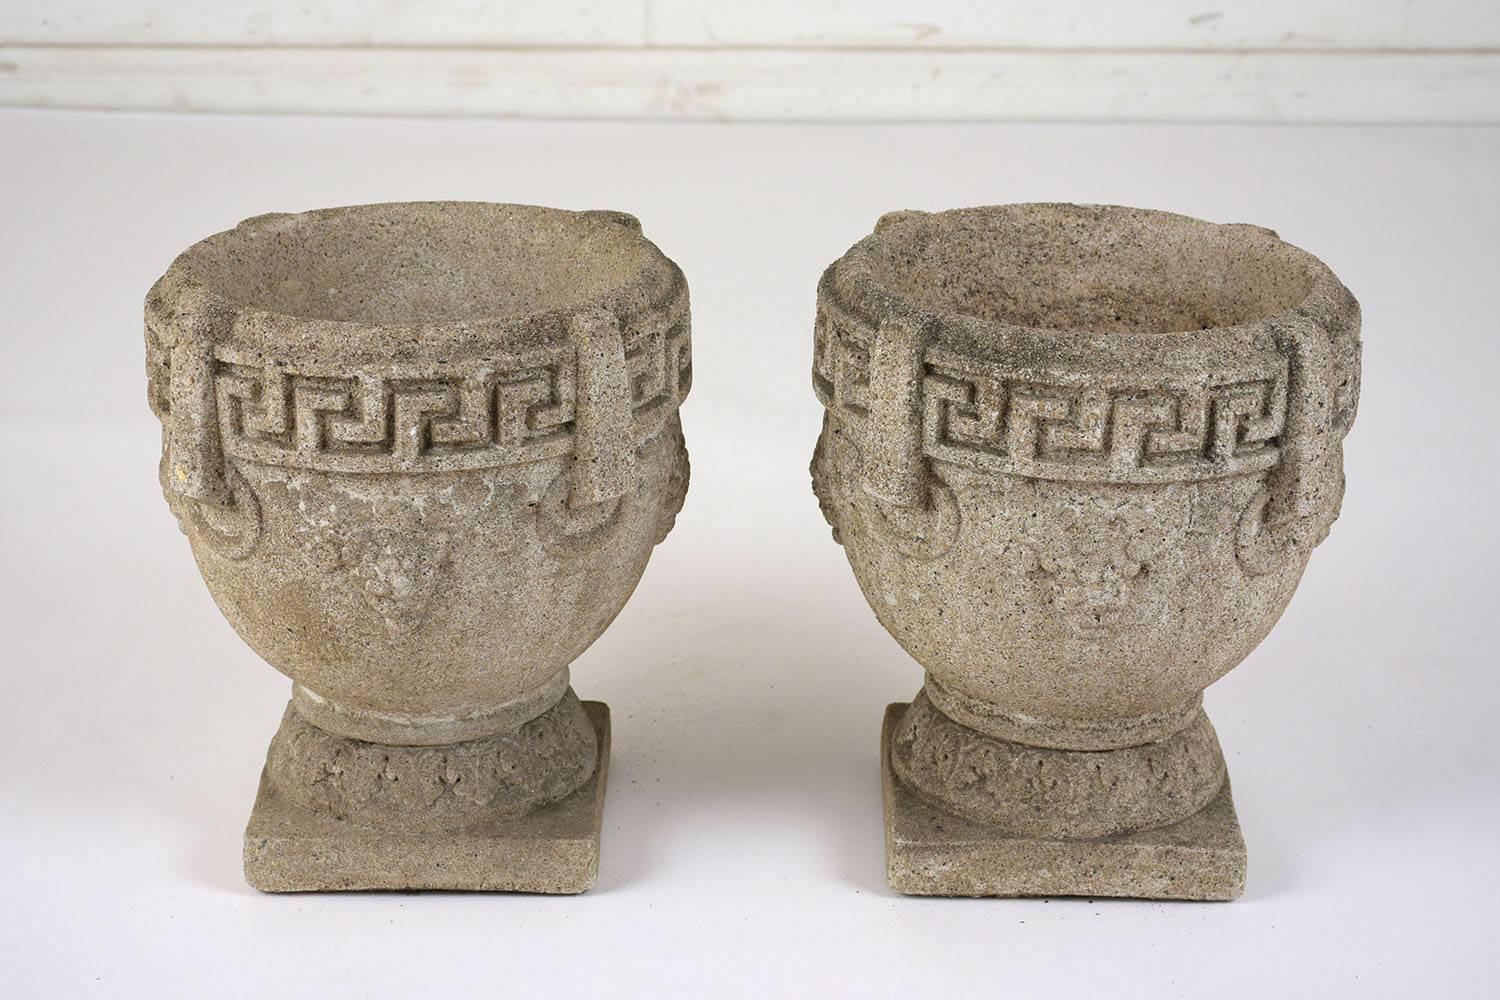 This pair of 1950s Regency style planters are made from concrete with a natural finish. The planters have a classic urn shape with a Greek meander key band along the top and faint impressions of grape bunches along the sides and acanthus leaves at